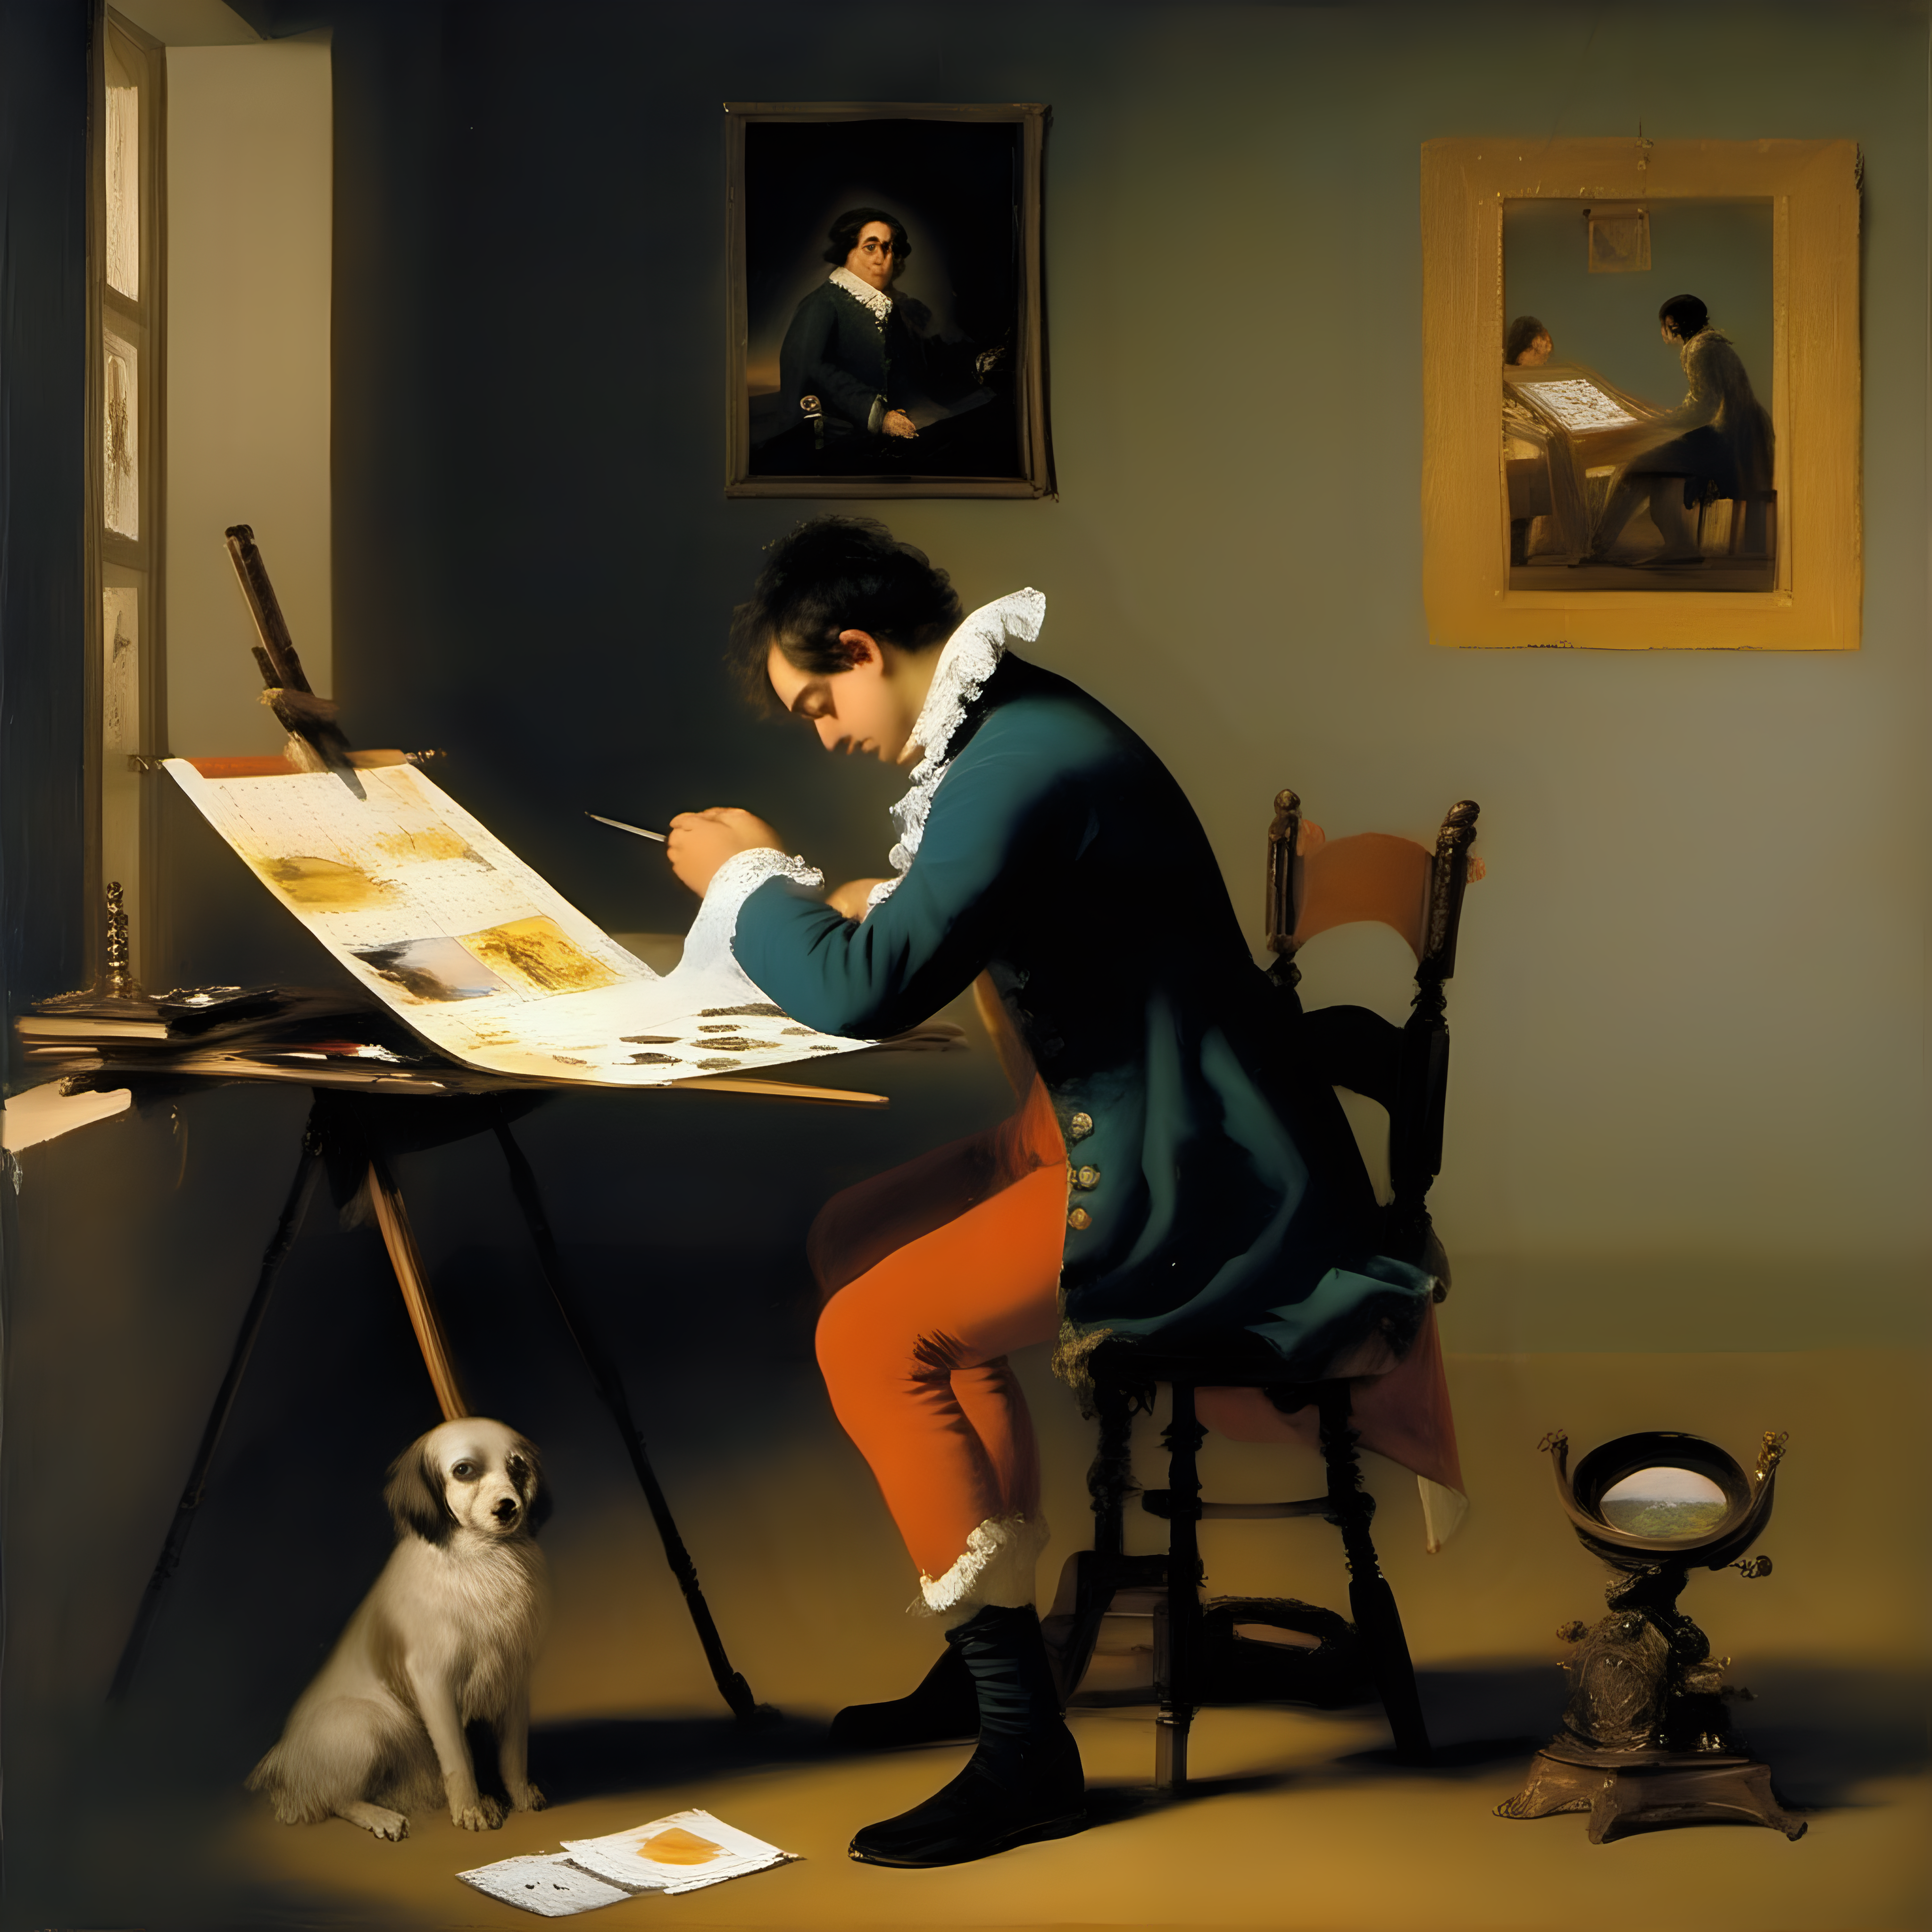 A young man creating an image calender for his love, together with an AI model, Francisco de Goya oil painting